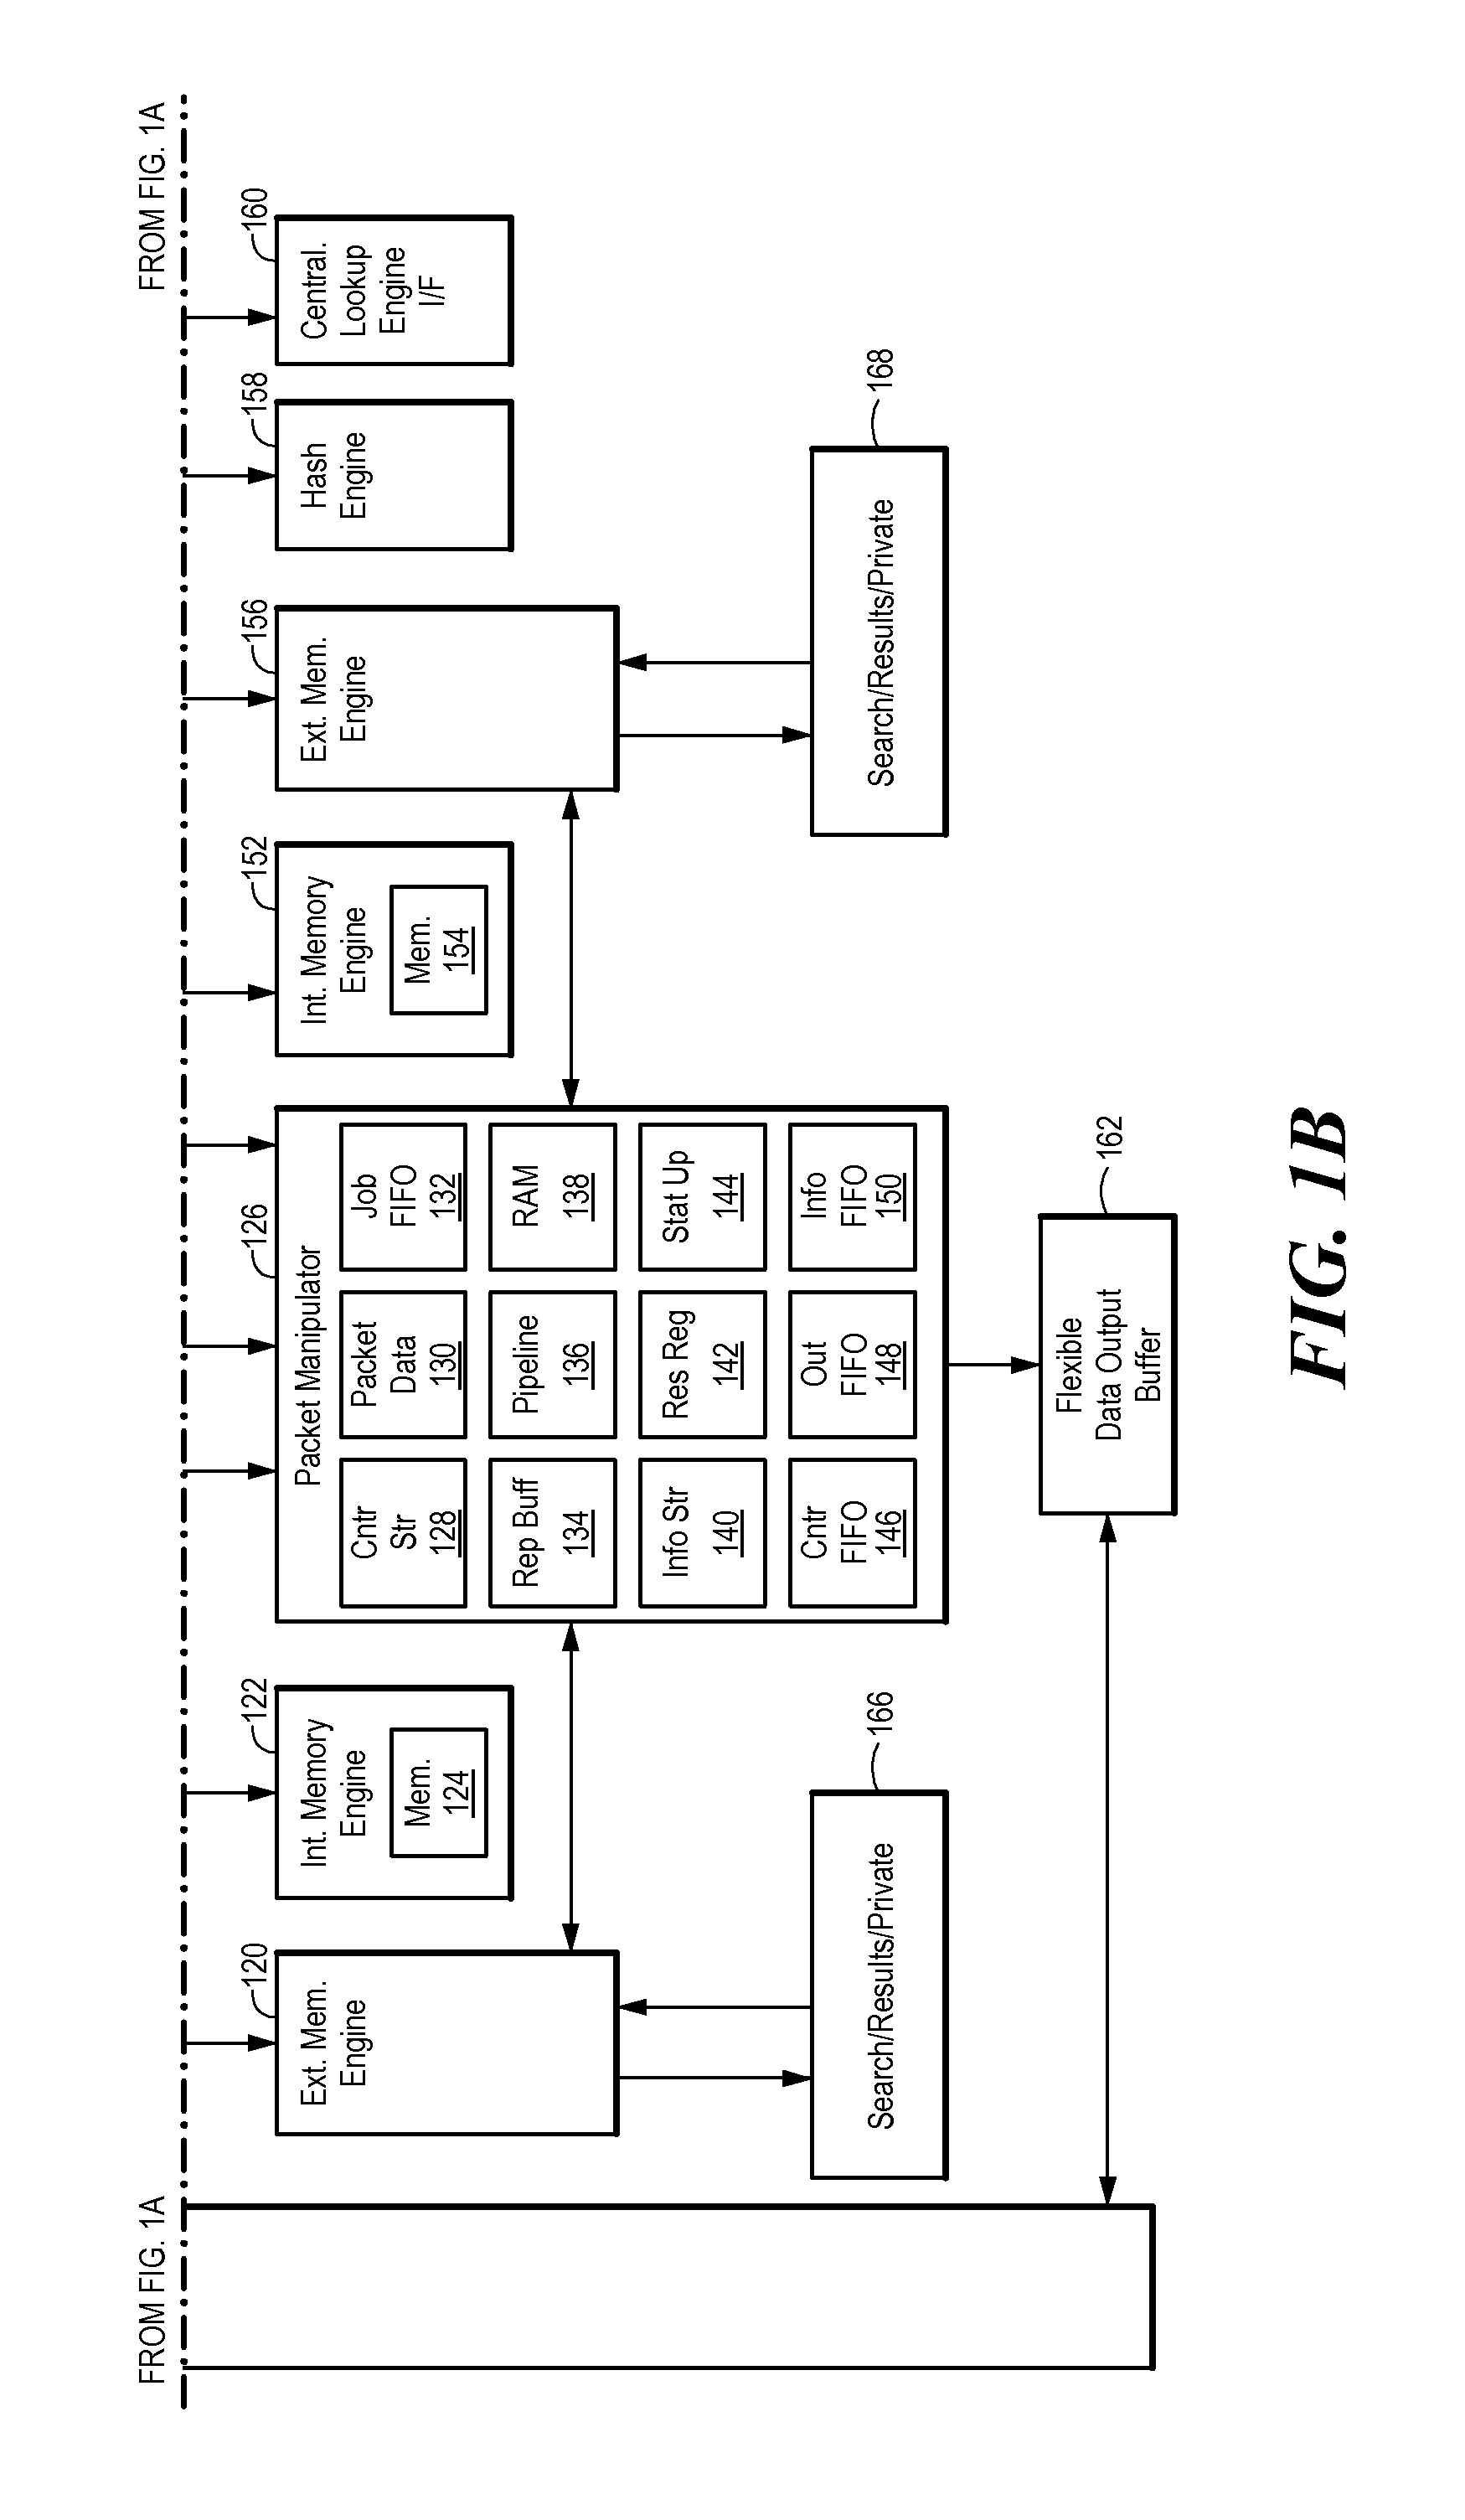 Method and system for sharing a computer resource between instruction threads of a multi-threaded process